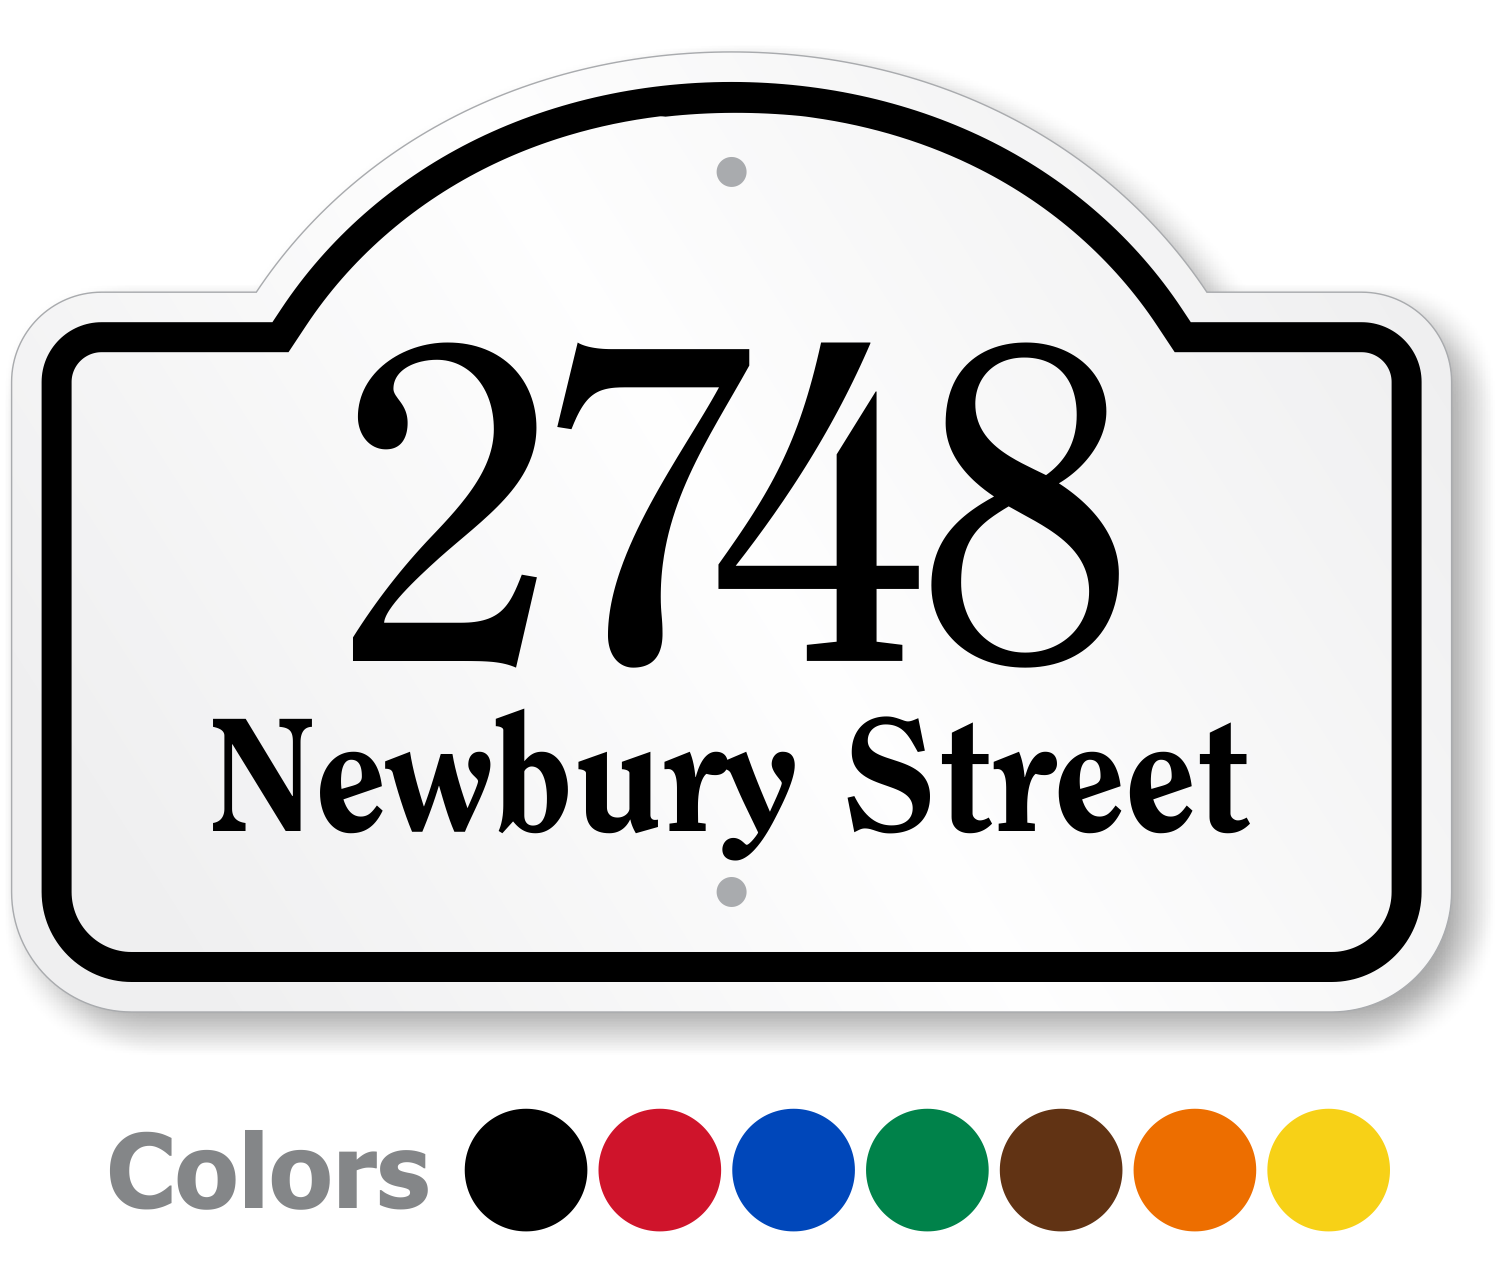 Personalized Street Signs | Custom Street Signs